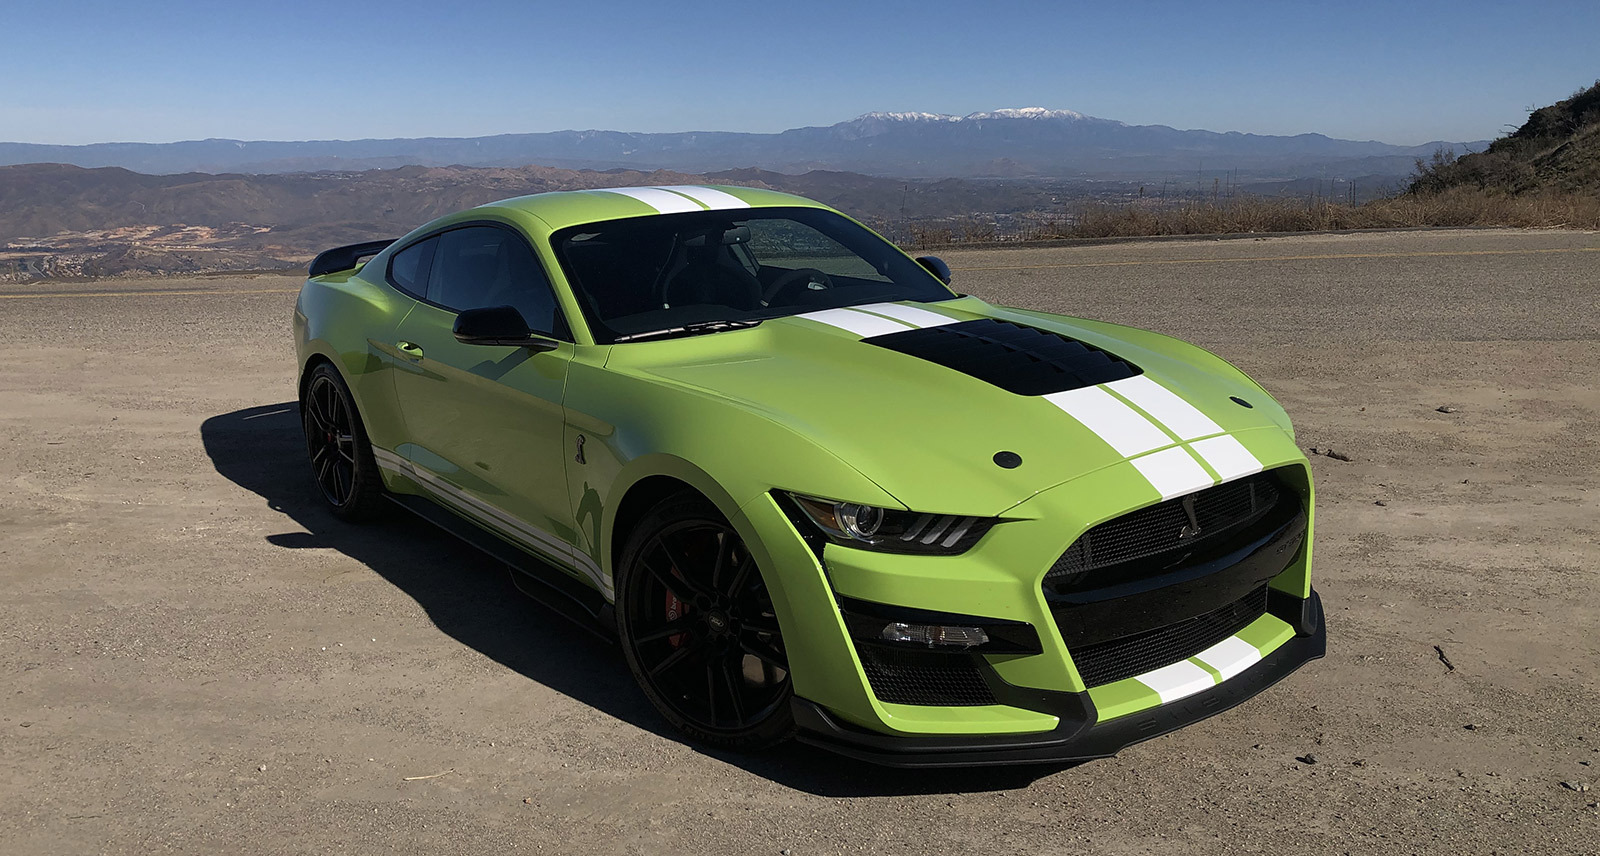 Watch: 2020 Ford Mustang Shelby GT500 Review – Is It the Best American Car Ever?